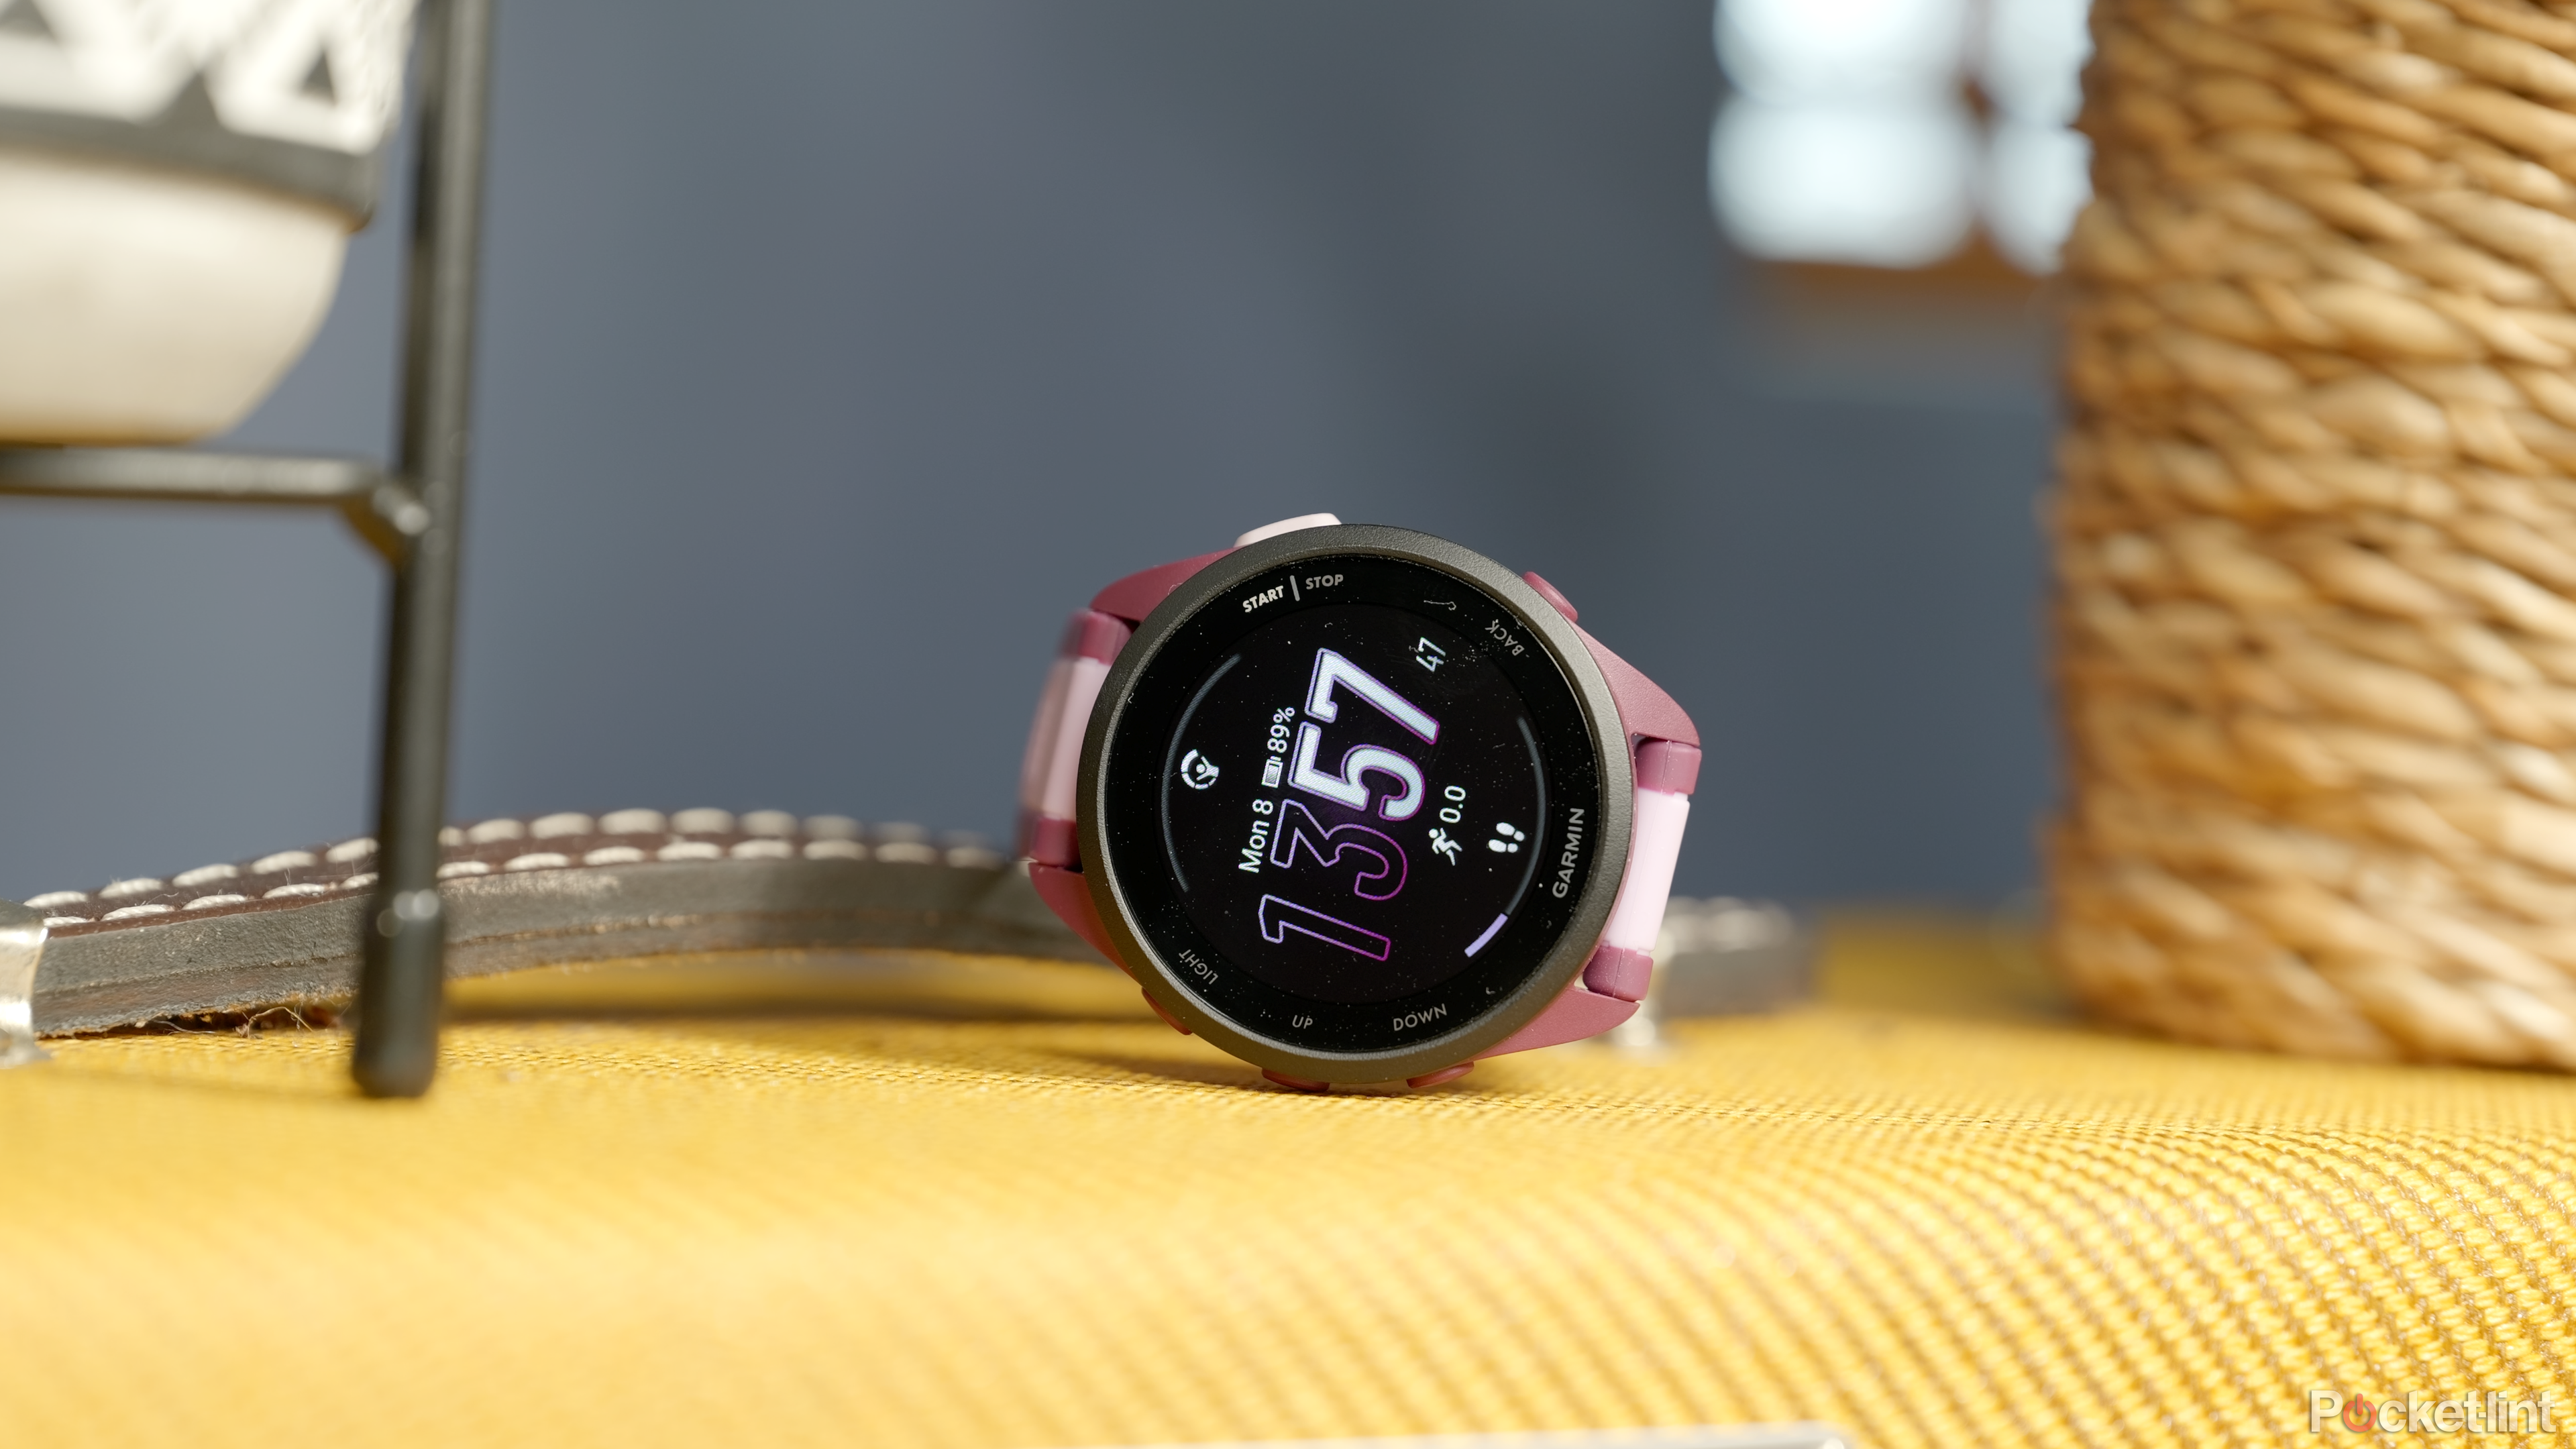 The free watchface that comes with the Forerunner 165